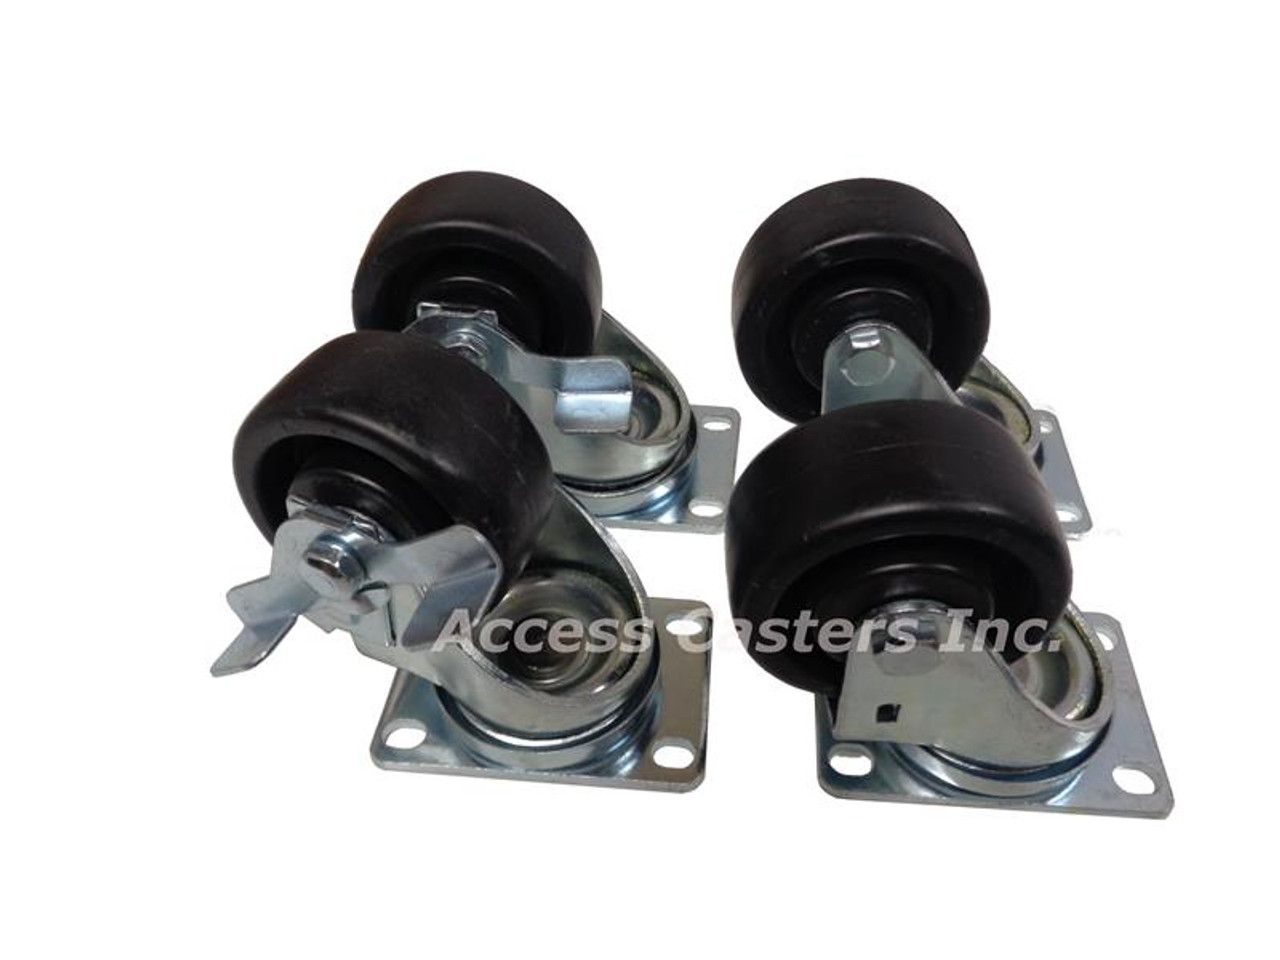 AC-10314-79 Caster set of 4 used on Silver King units